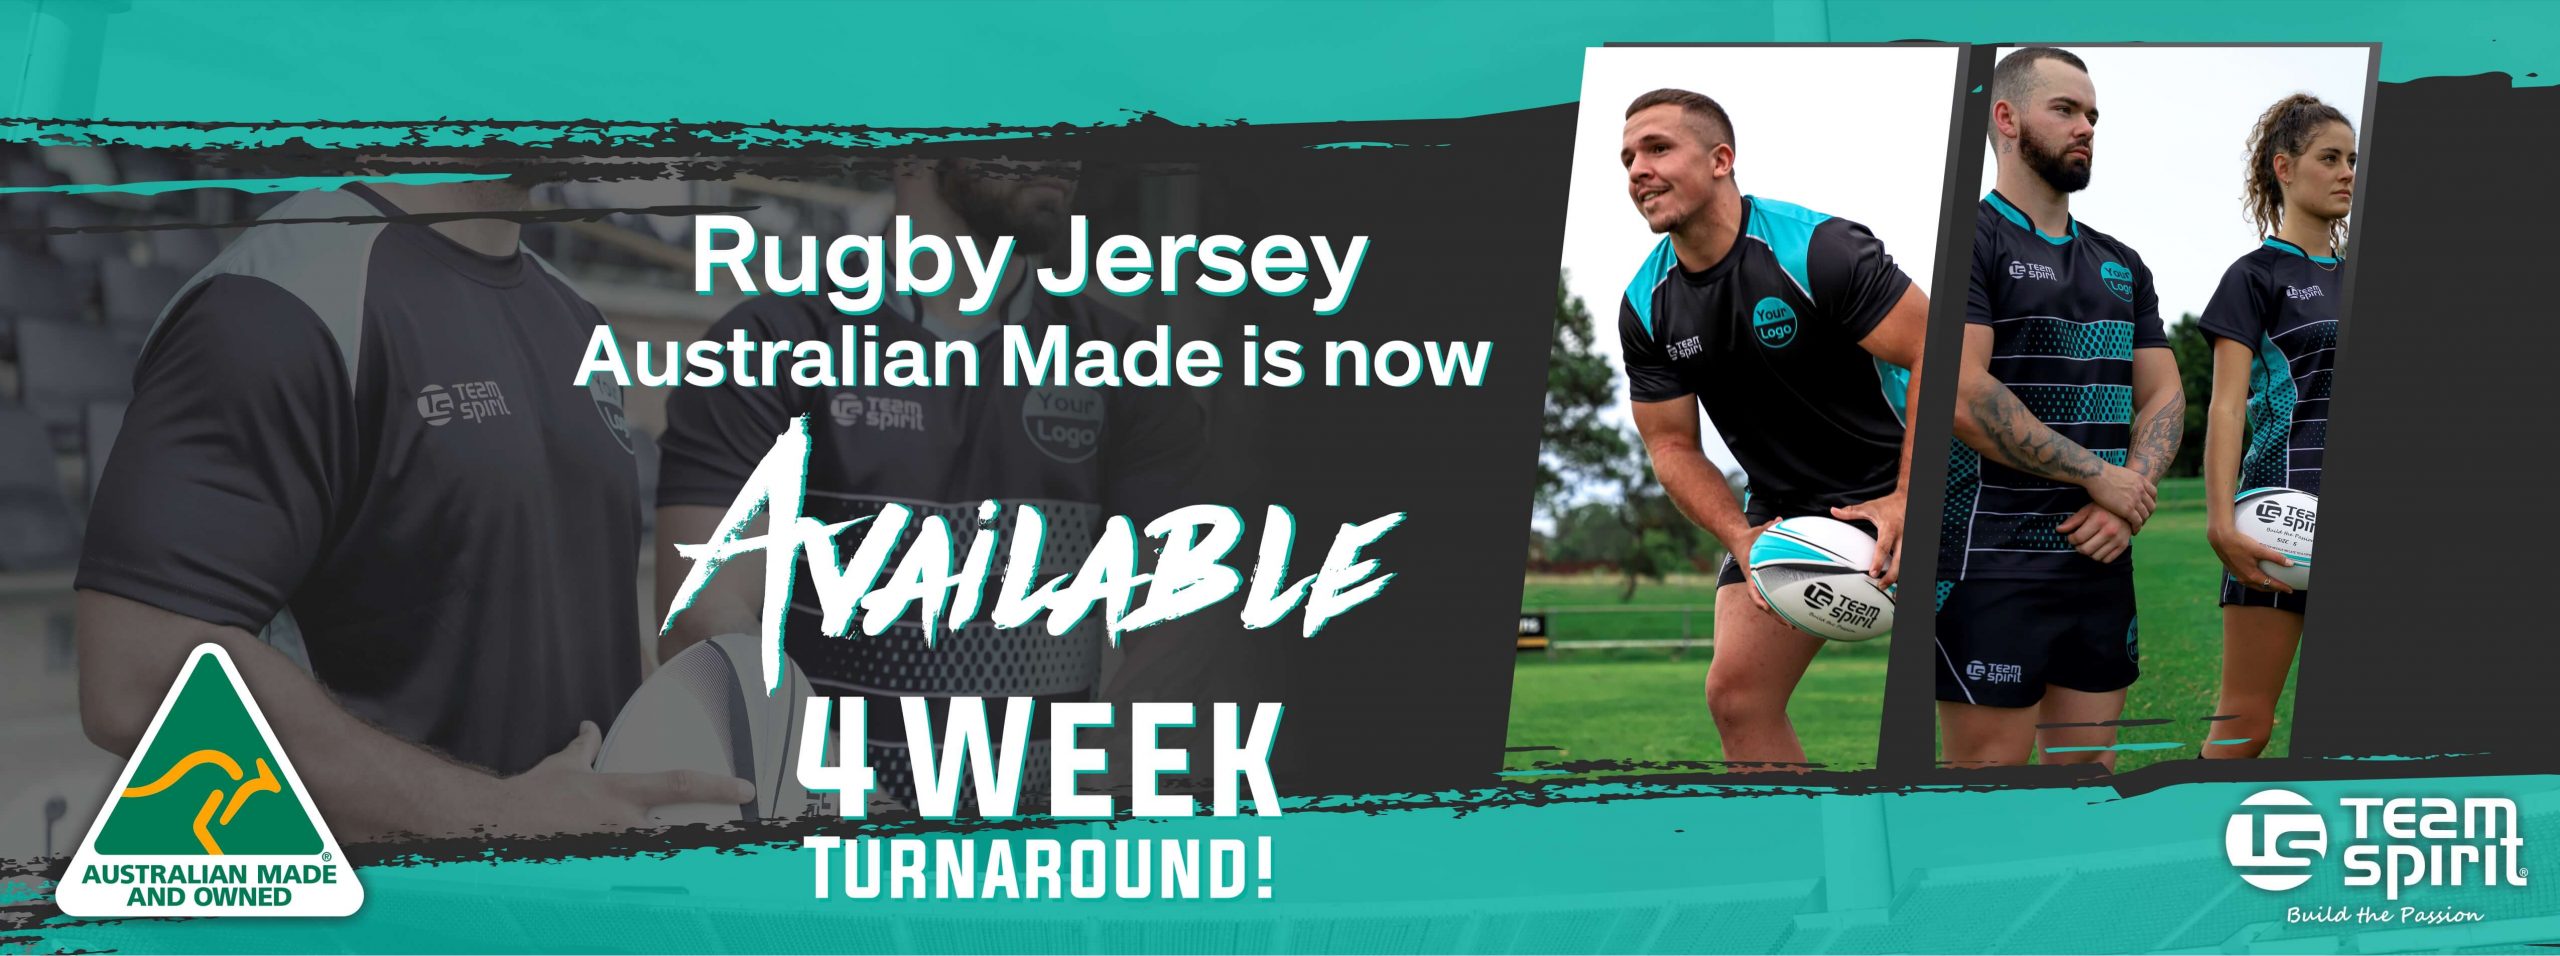 Australian Made Rugby jersey